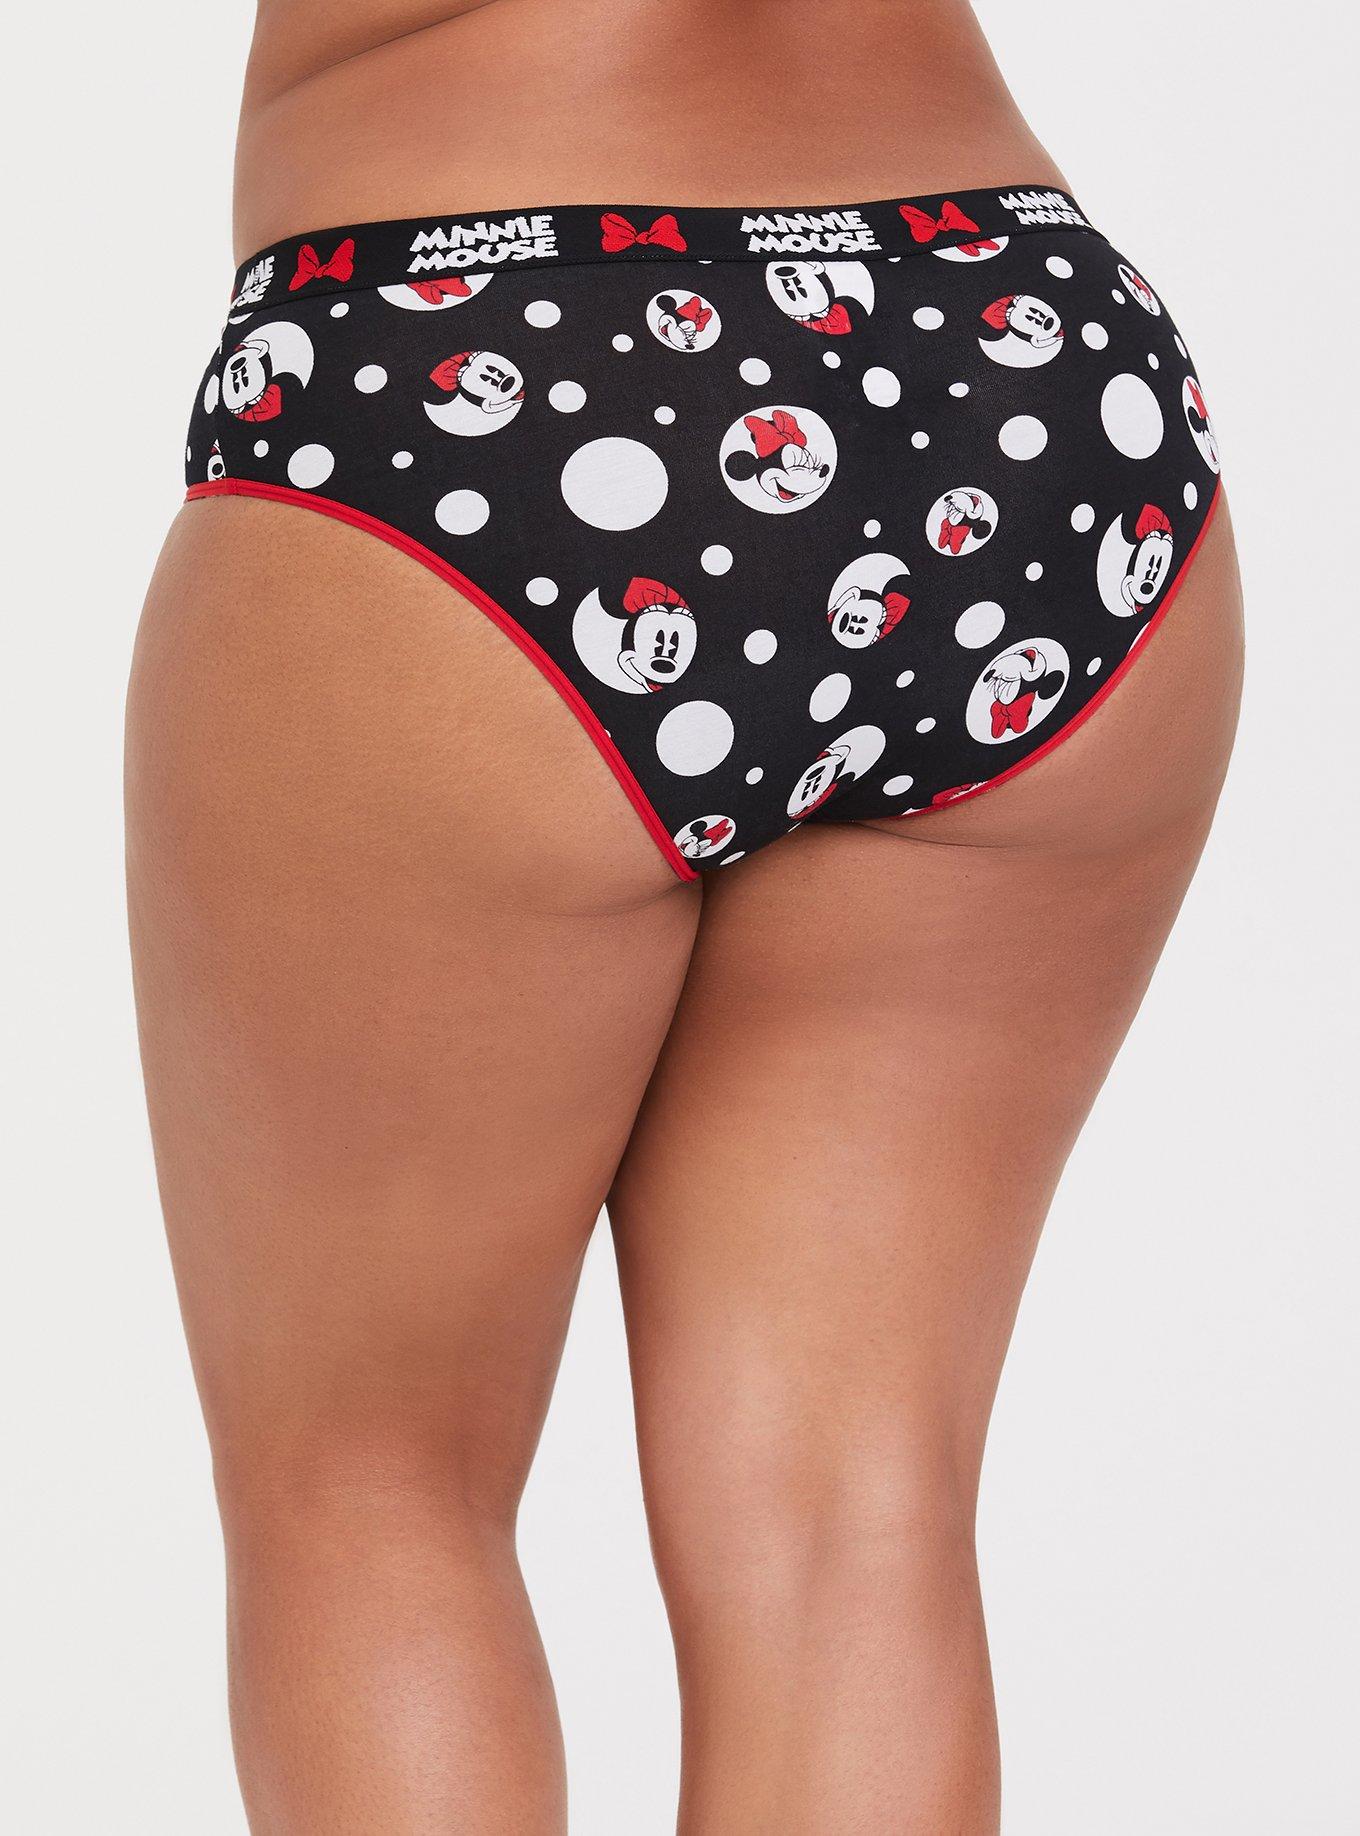 Wholesale adult disney panties In Sexy And Comfortable Styles 